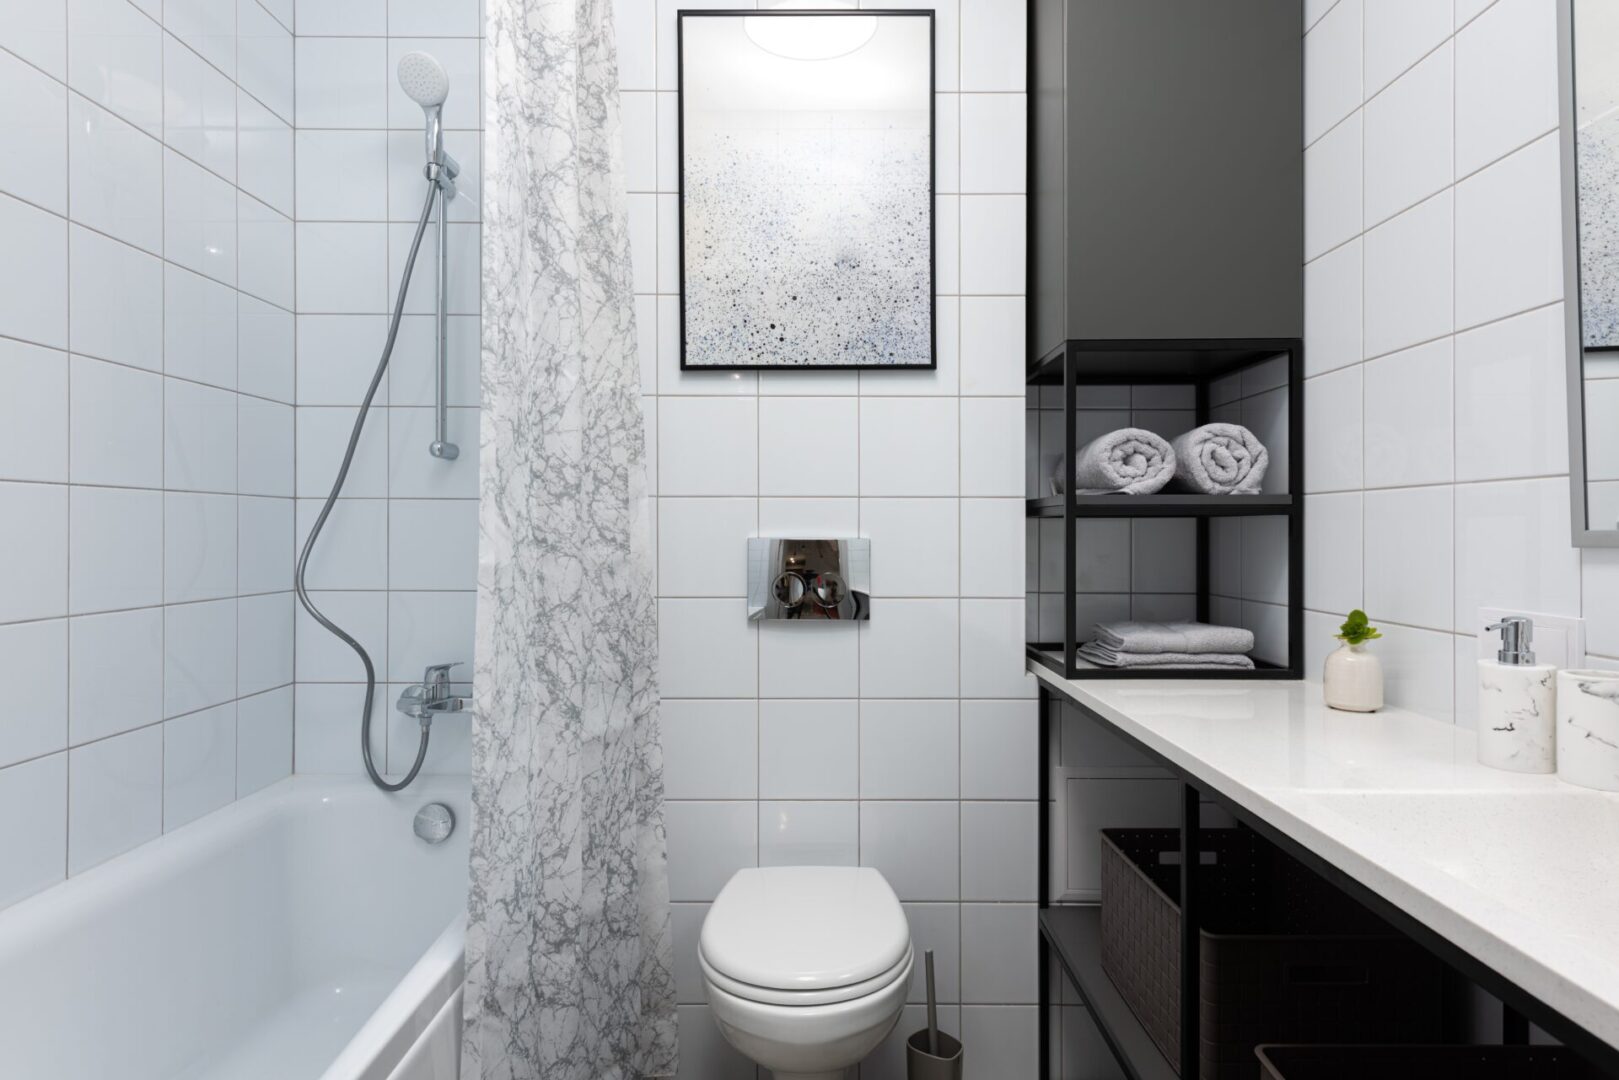 A bathroom with white tile and black accents.